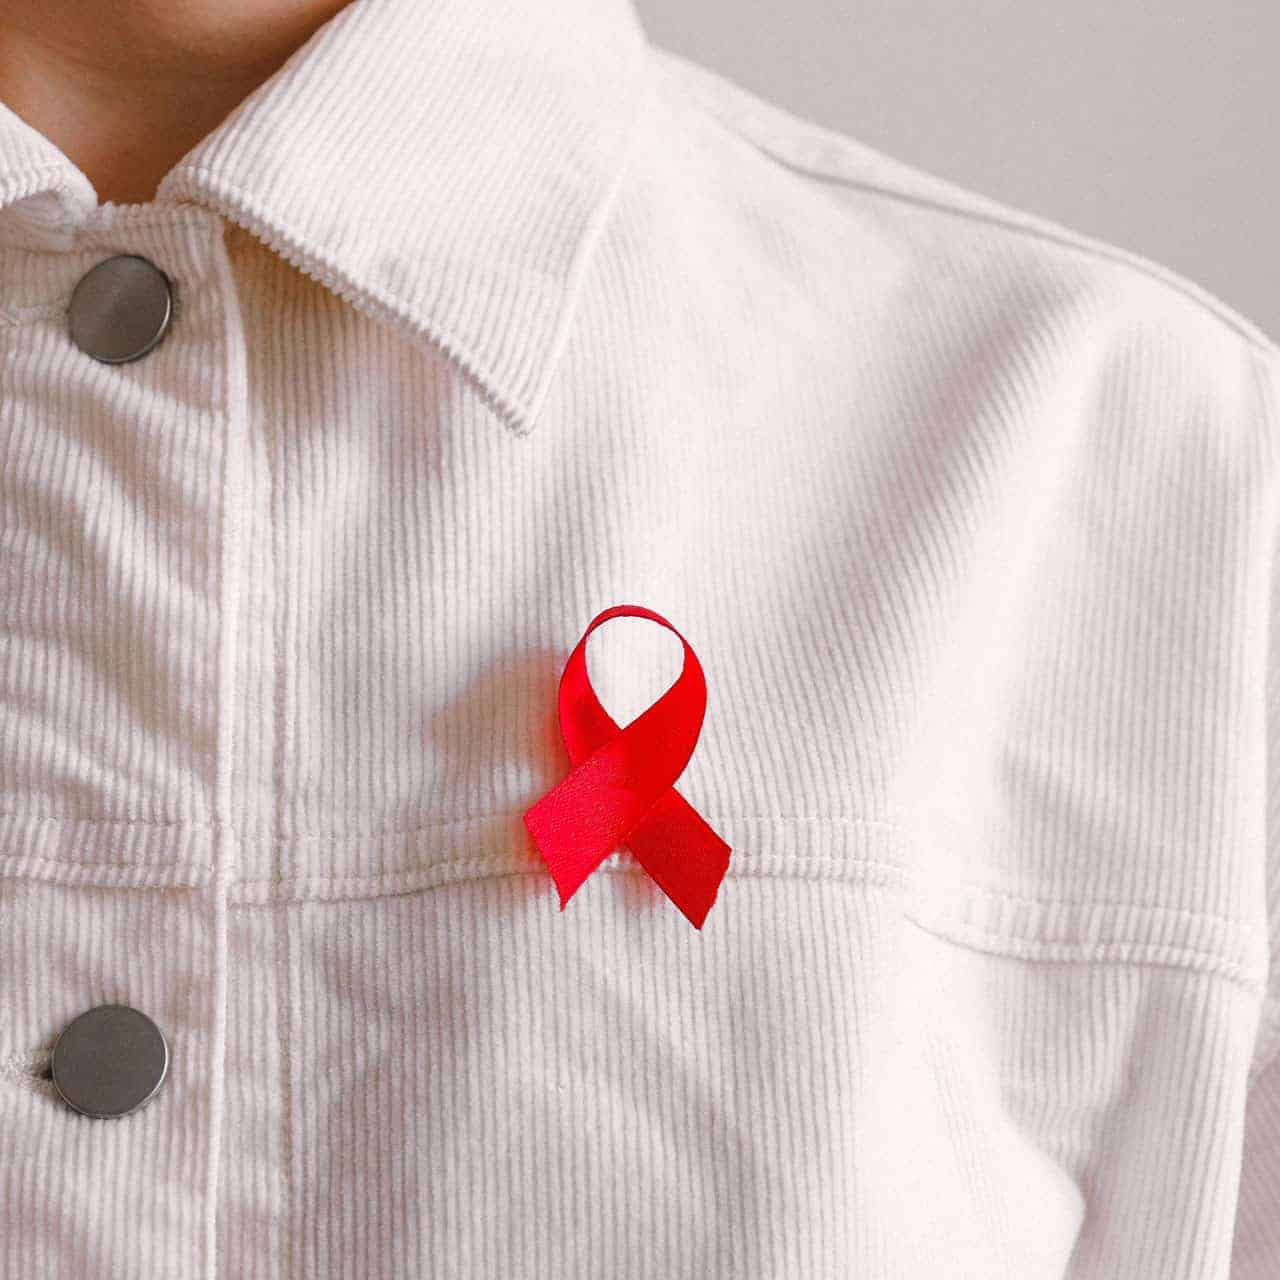 The World AIDS Day